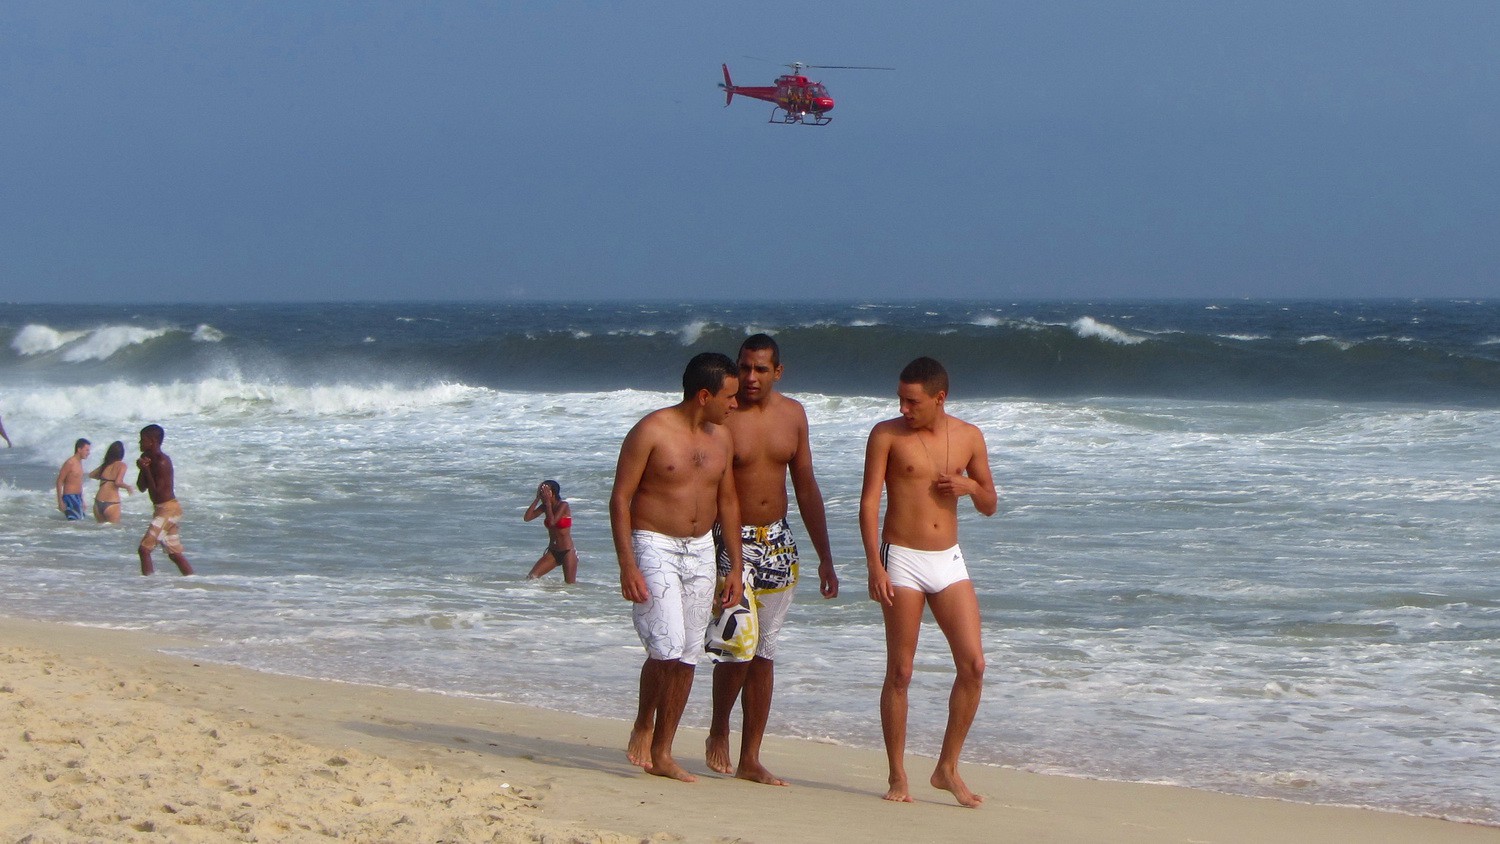 Handsome guys with helicopter looking for surfers in distress